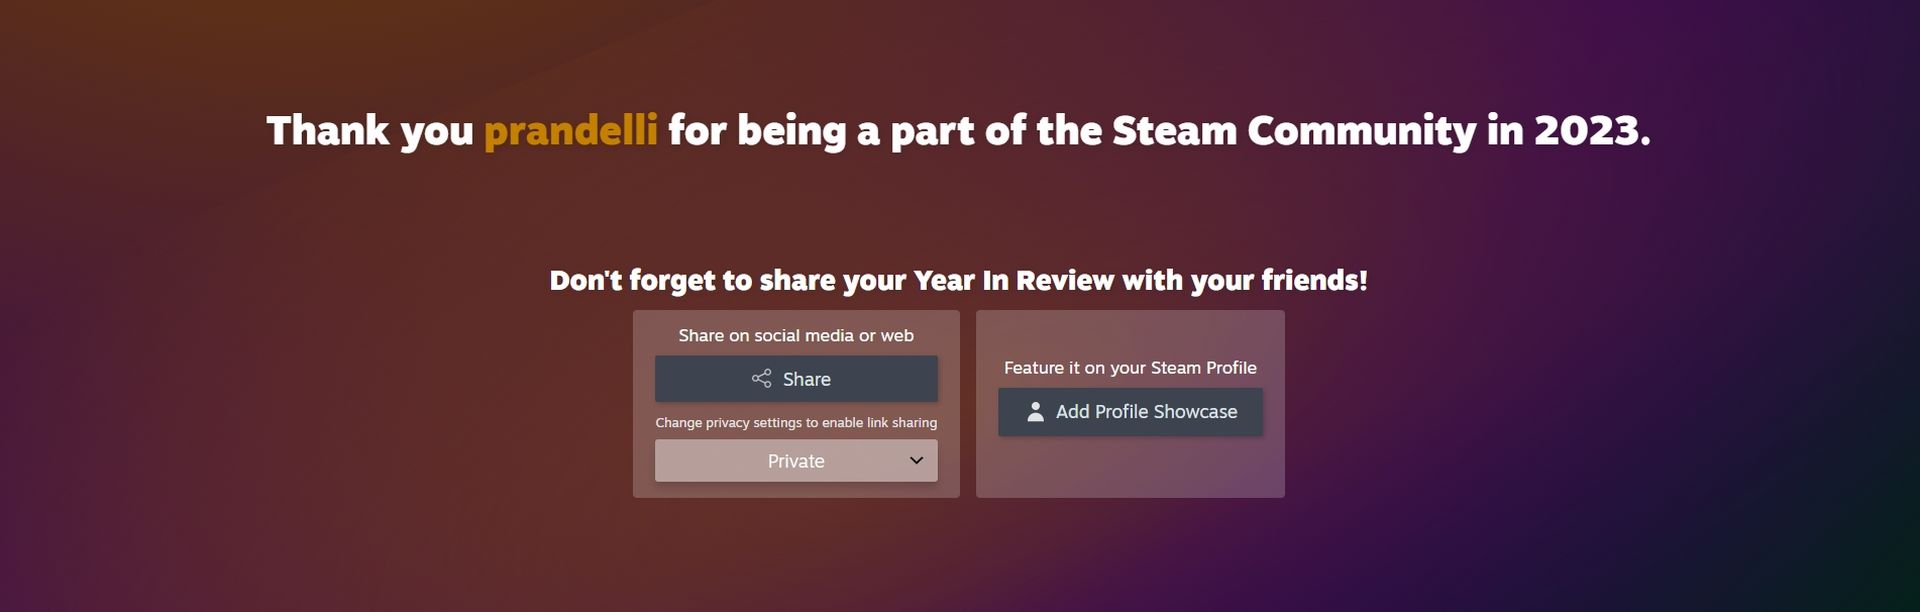 Steam-samenvatting 2023: Steam Year in Review is live gegaan